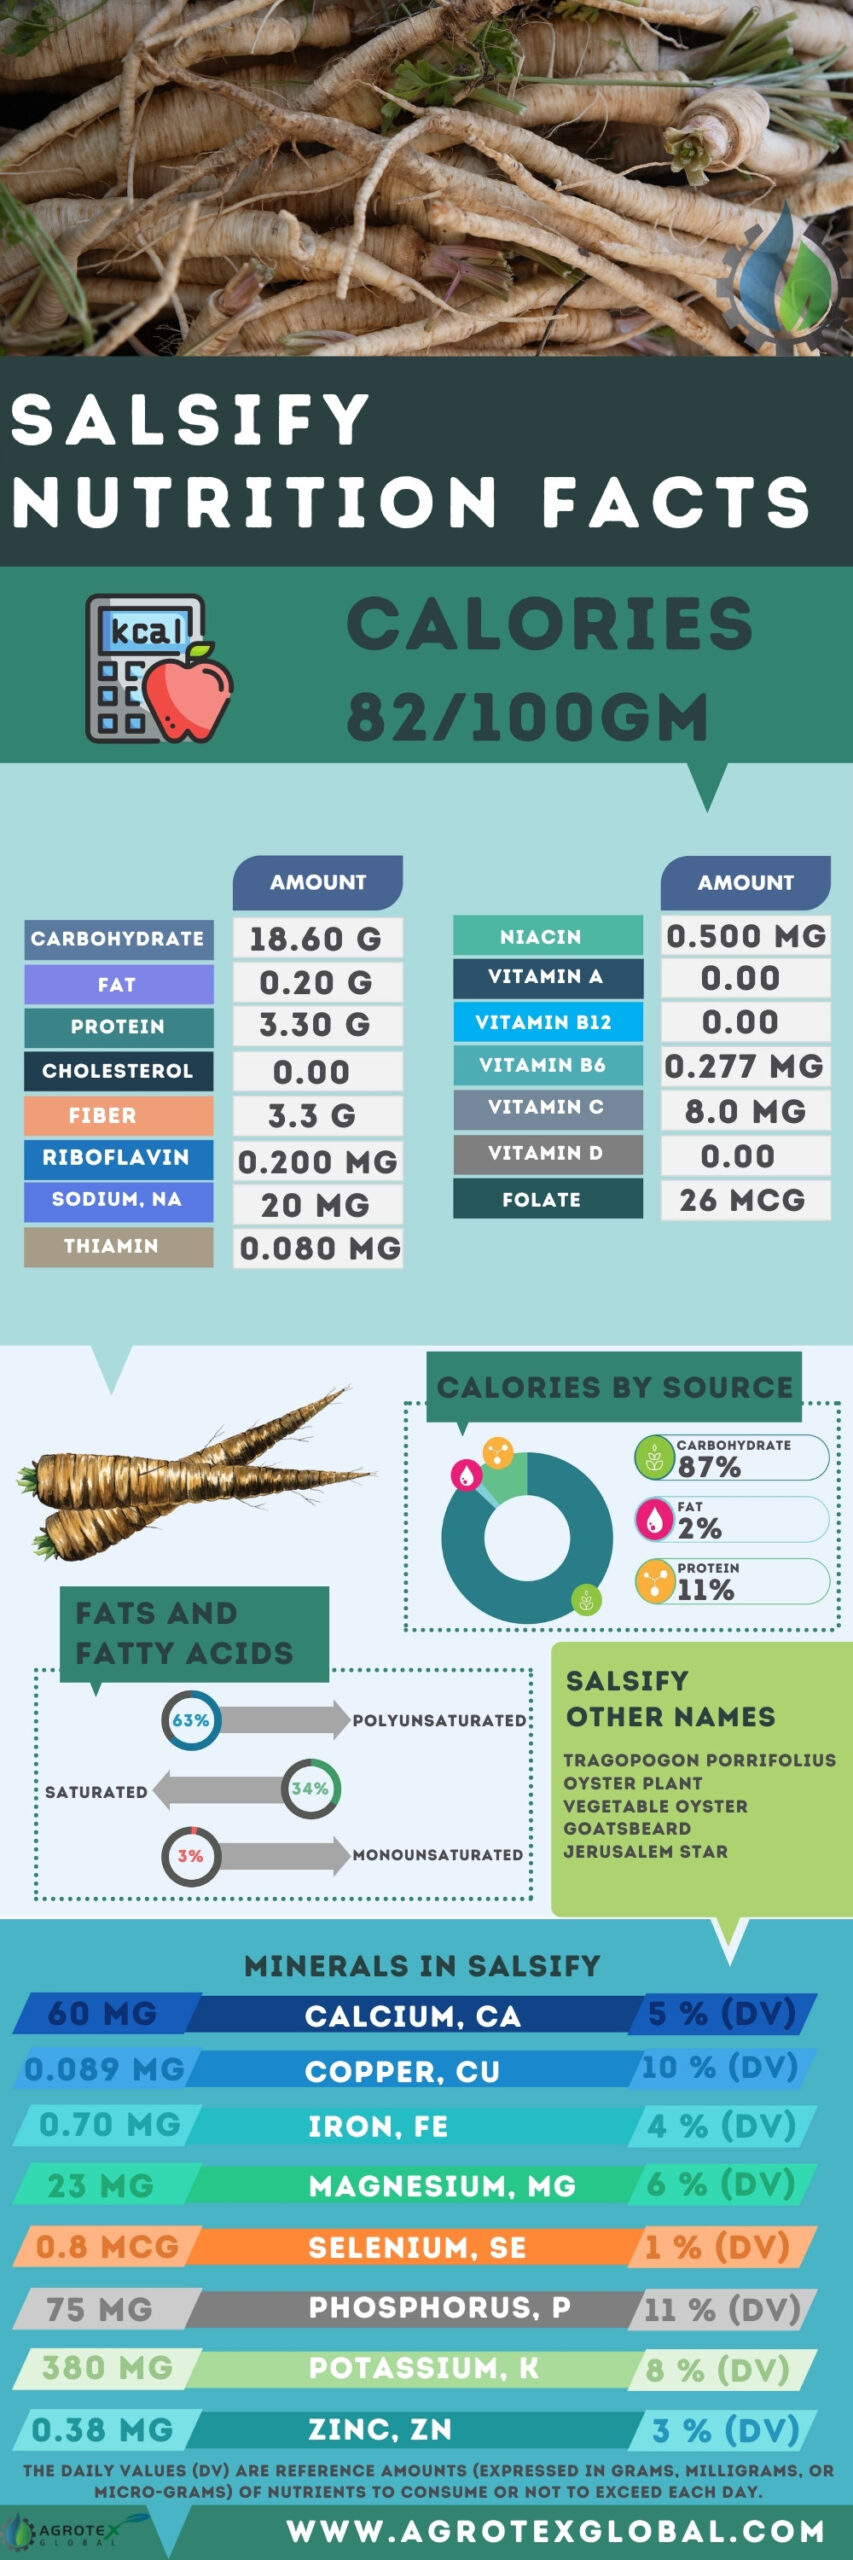 Salsify NUTRITION FACTS calorie chart name infographic